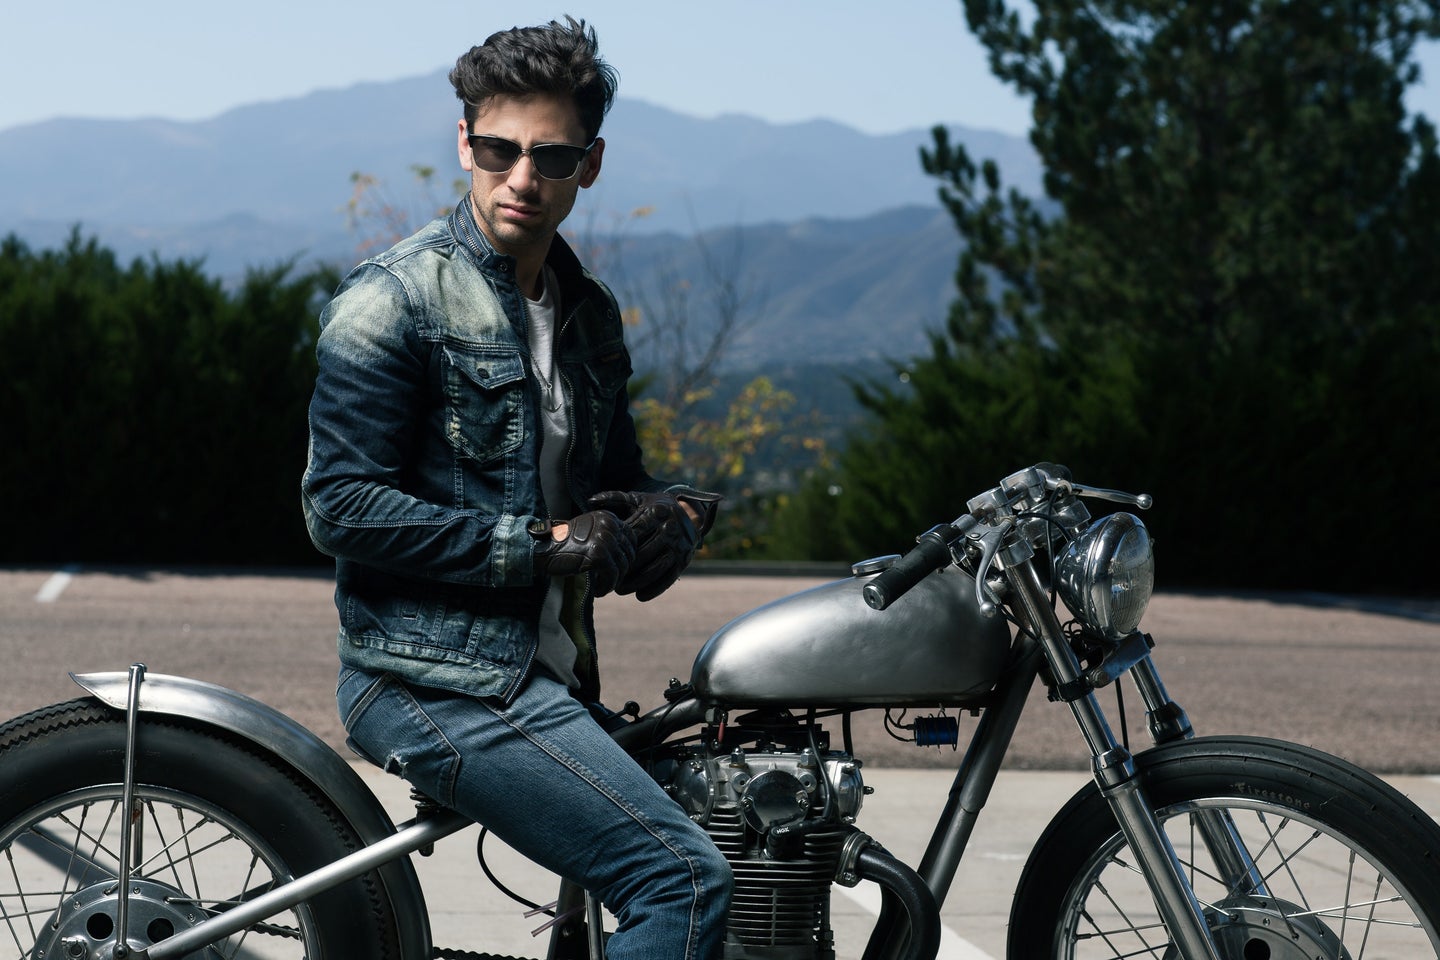 Best Motorcycle Sunglasses: Stop the Squint